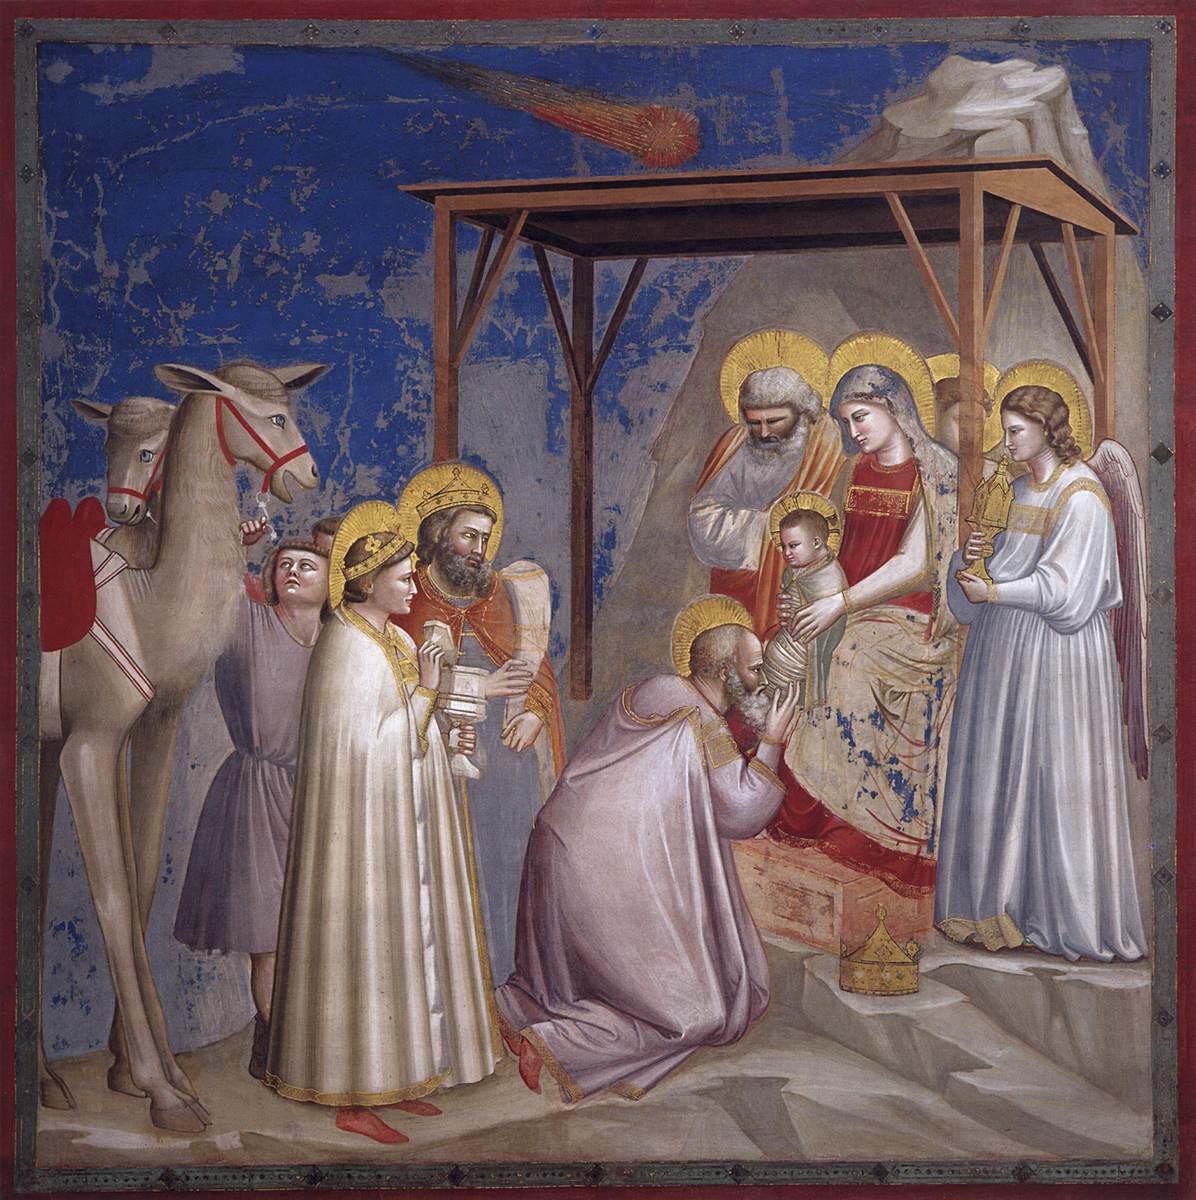 No 18 Scenes from the Life of Christ: 2 Adoration of the Magi